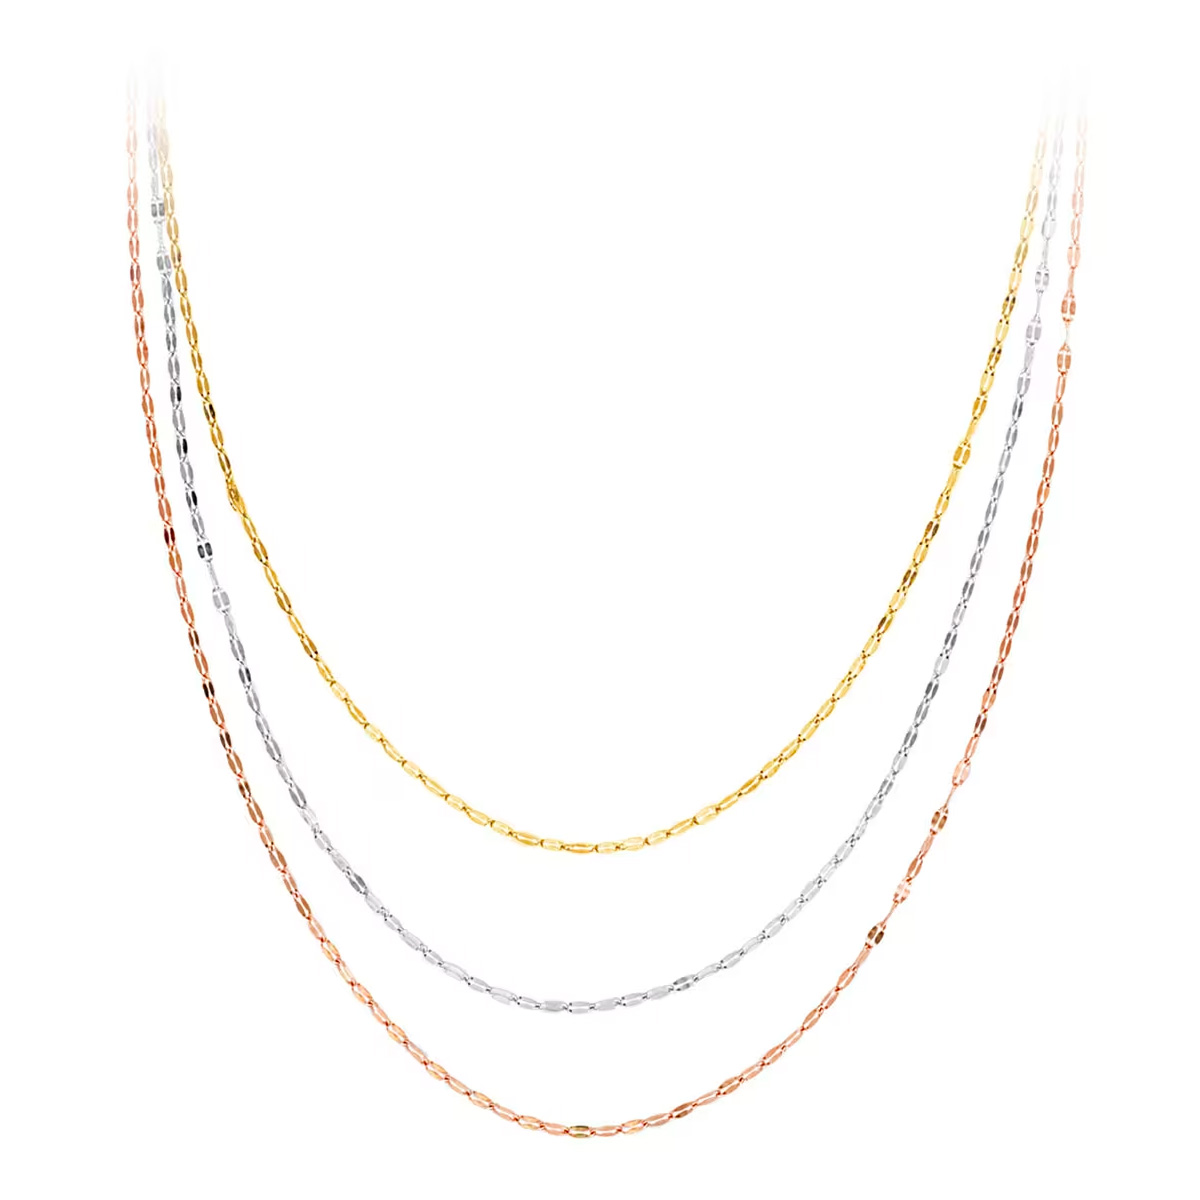 Wedding Chicks Fred Meyer Layered Necklaces